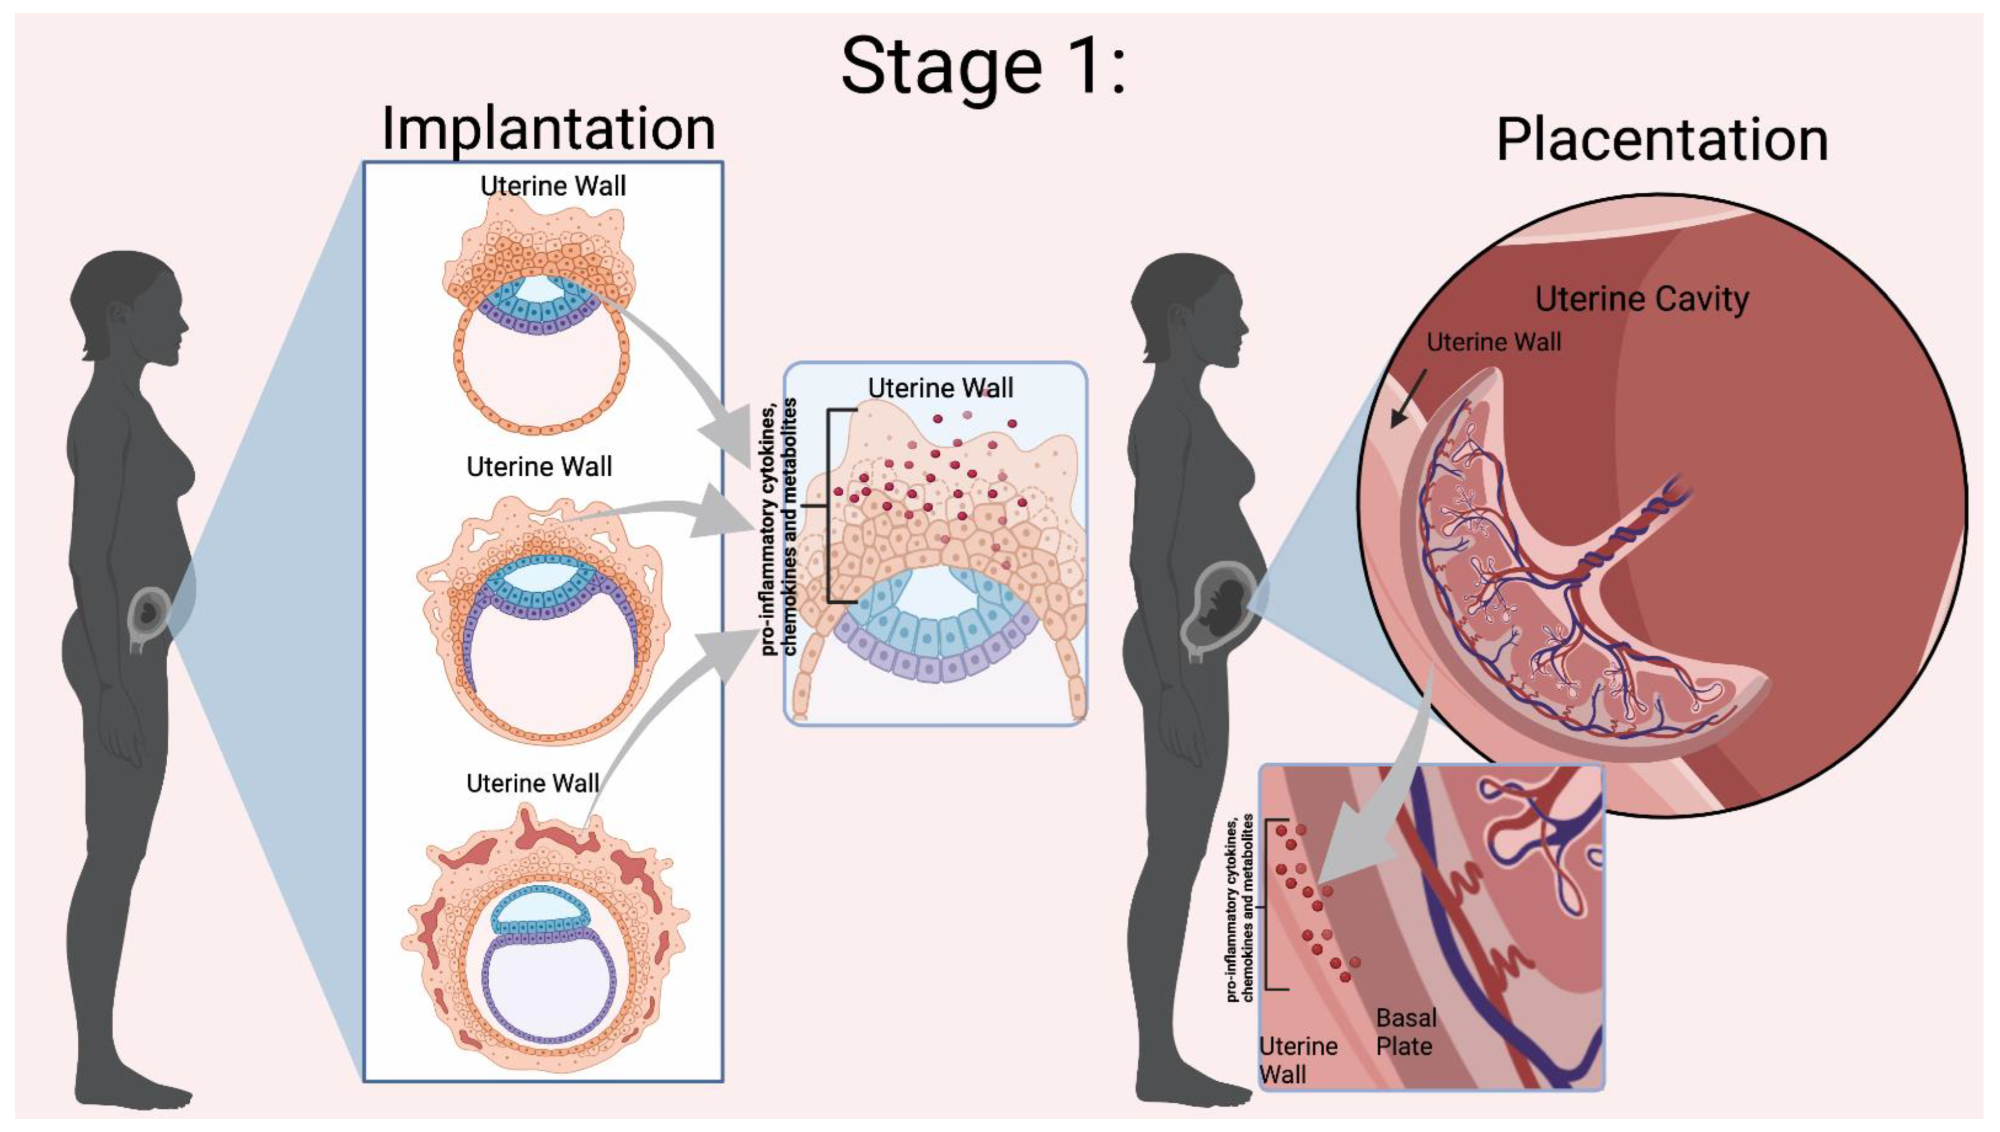 Mor et al. Stage 1 of Immunological Events Occurring During Pregnancy. Implantation relies on the presence of pro-inflammatory cytokines, chemokines, and other mediators to invade the uterine wall. During placentation, there is a dynamic relationship between the uterine wall and the placenta for trophoblast differentiation and proper placental development. Inflammation is indicated by the red dots in the Figure. Figure created in BioRender.